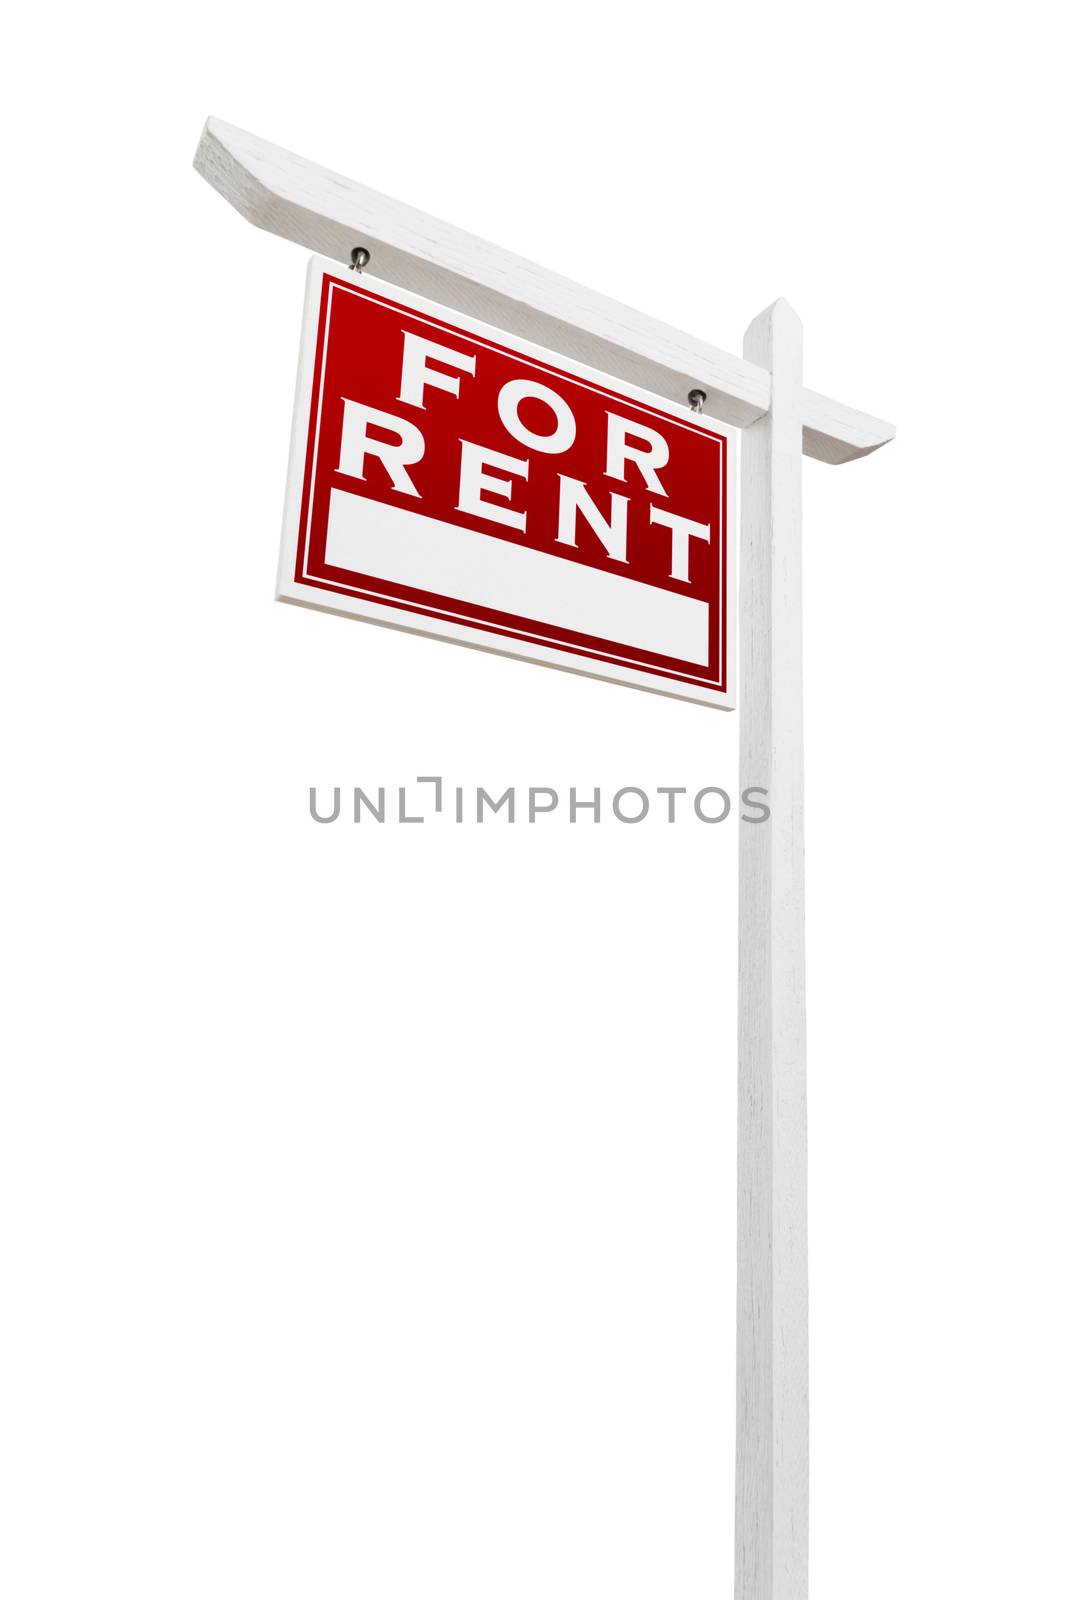 Left Facing For Rent Real Estate Sign Isolated on a White Backgo by Feverpitched